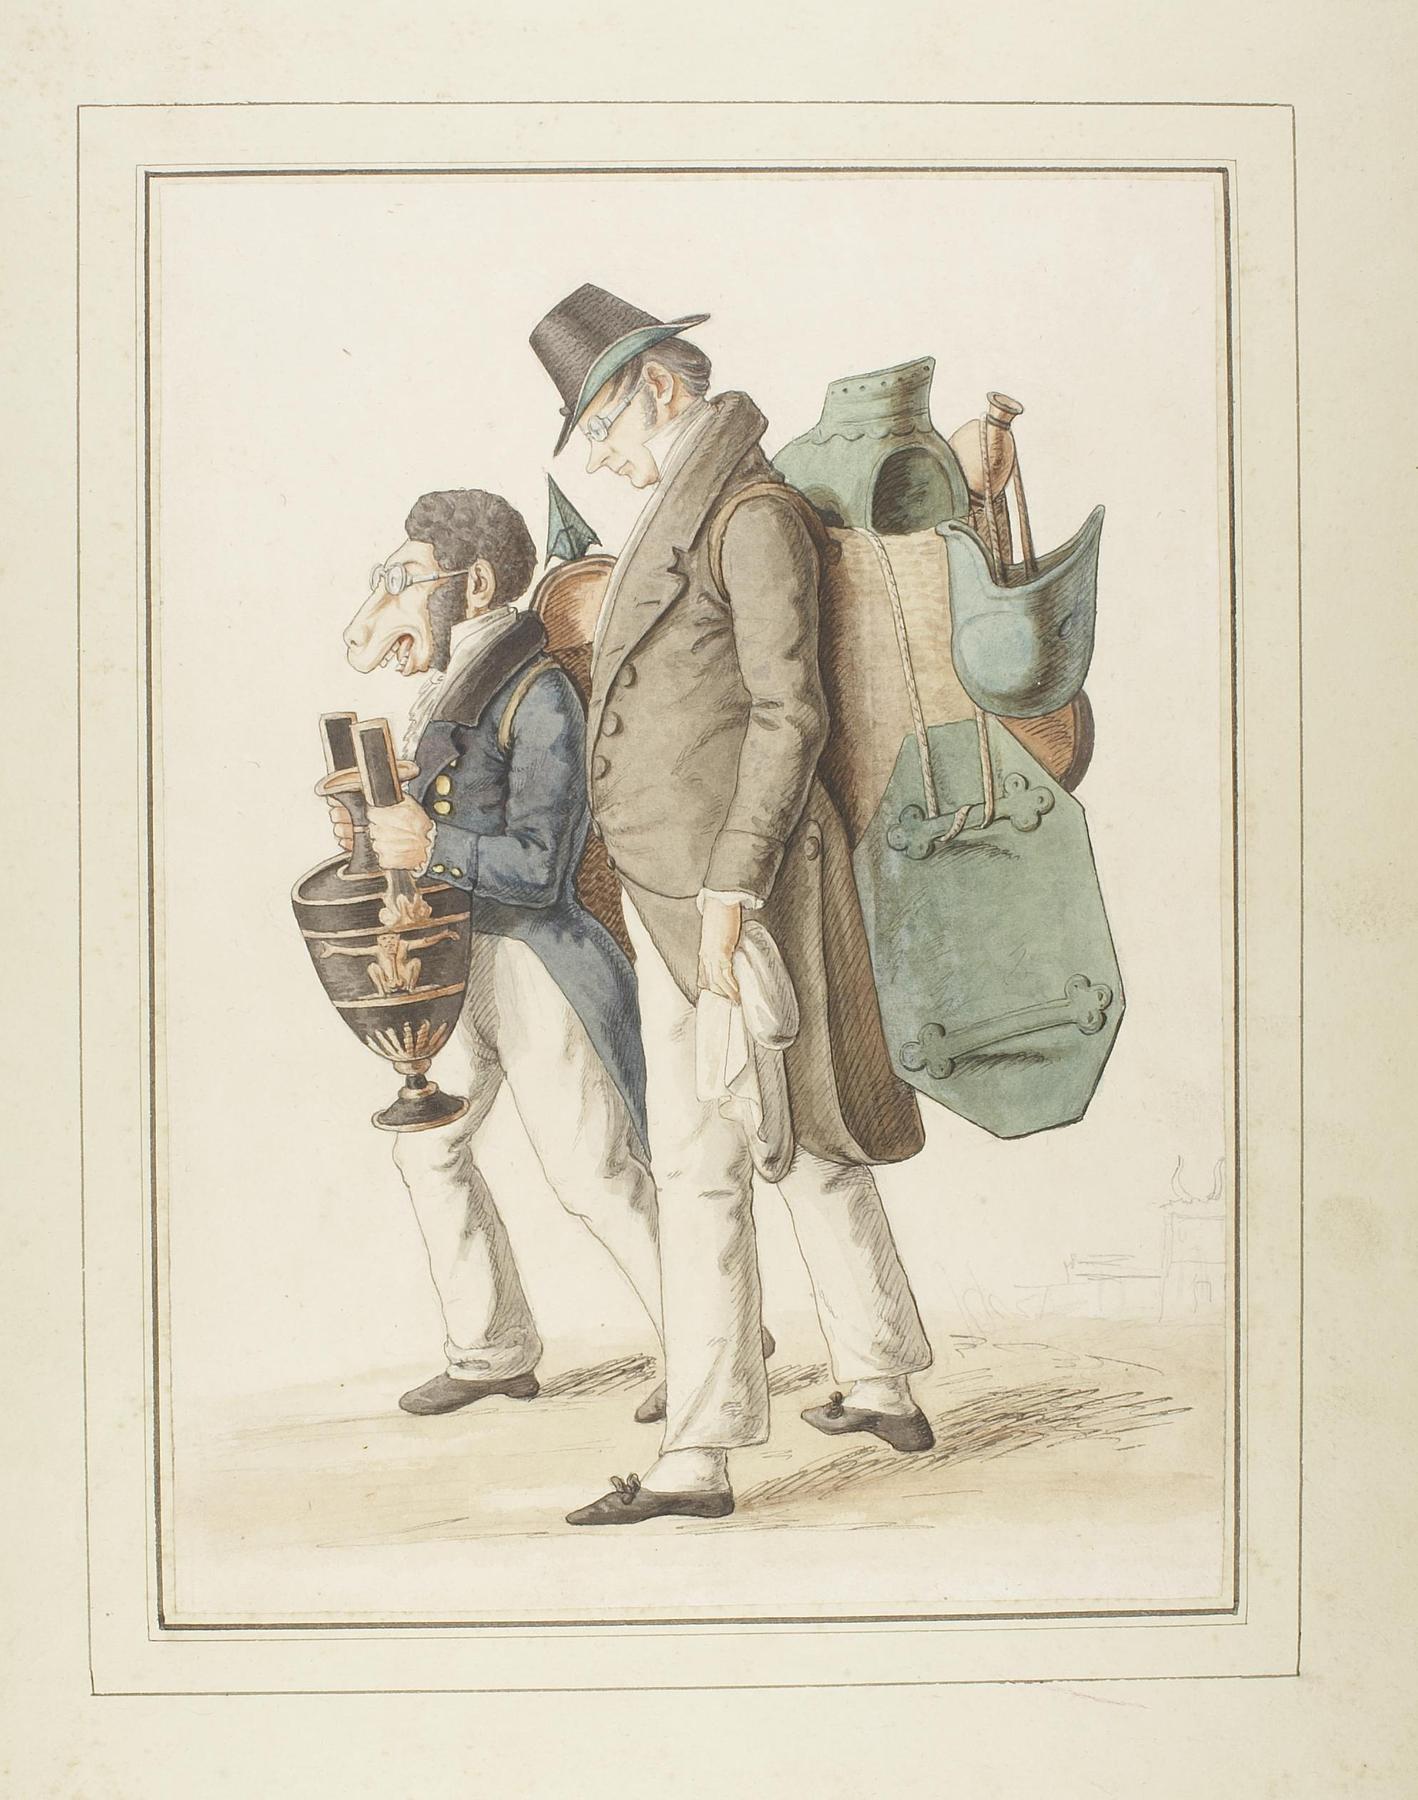 Caricature of the archeologist Wilhelm Dorow and the Swedish Count Nils Gustav Palin(?), D1005